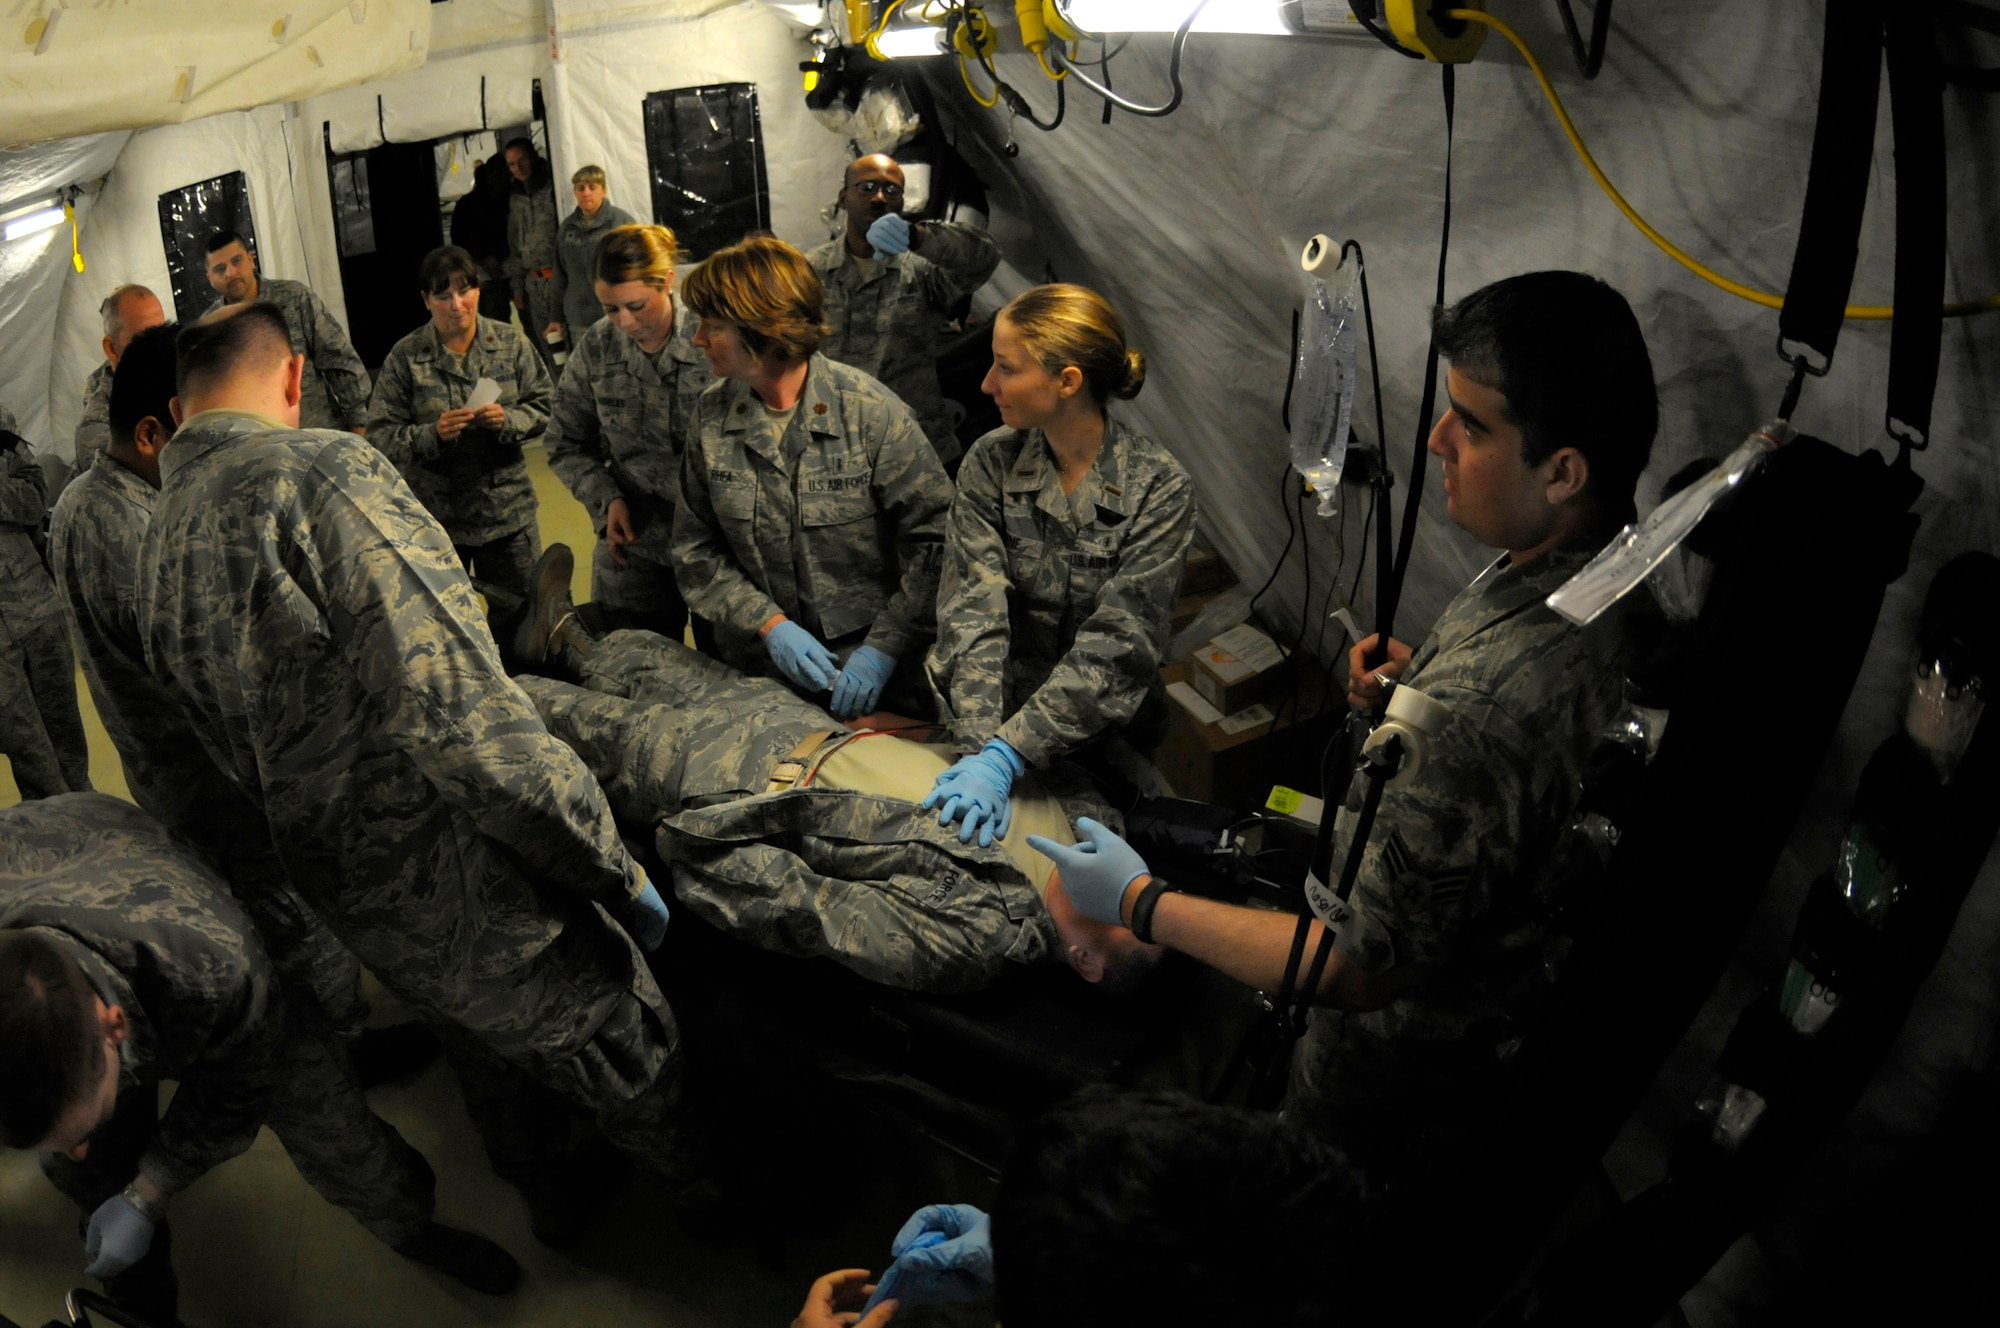 The 86th Medical Squadron Intensive Care Unit works to resuscitate a patient who is unresponsive in the Expeditionary Medical Support Exercise at Ramstein Air Base, Germany, Dec. 1, 2011. EMEDS was a week-long exercise for the 86th and 31st Medical Groups to hone their skills in a mock-deployed environment. (U.S. Air Force photo by Staff Sgt. Travis Edwards)